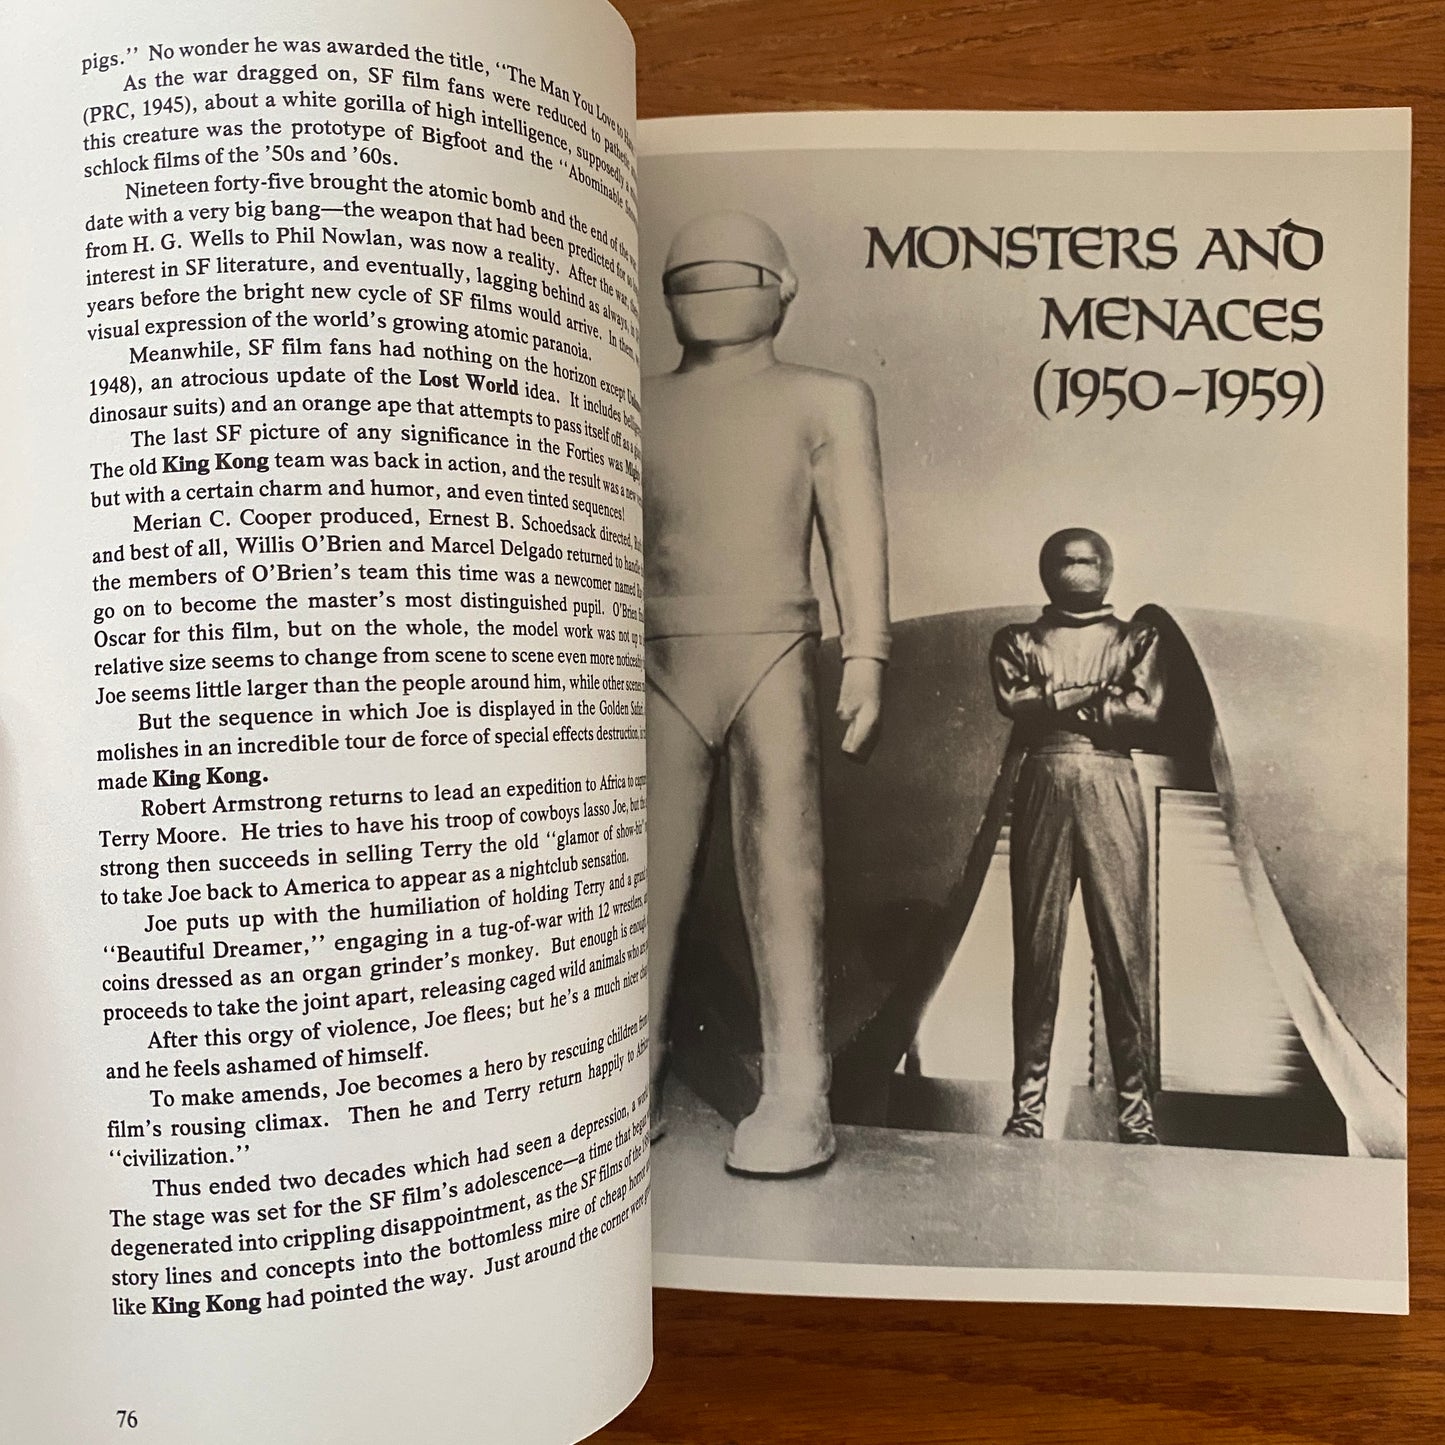 Things To Come: An Illustrated History of Science Fiction Film - Douglas Alver Menville